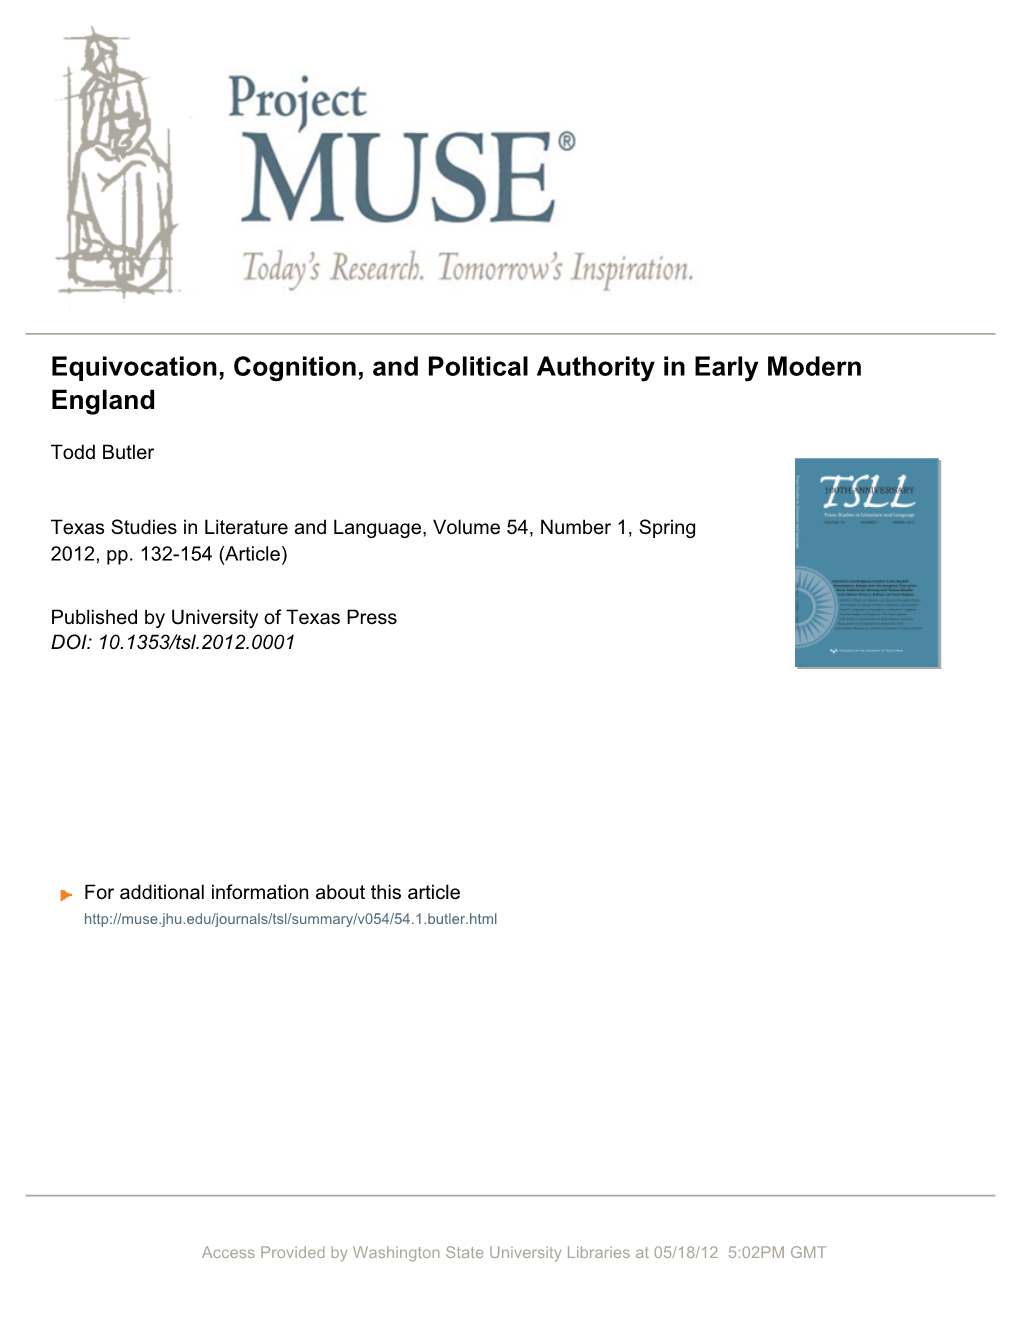 Equivocation, Cognition, and Political Authority in Early Modern England